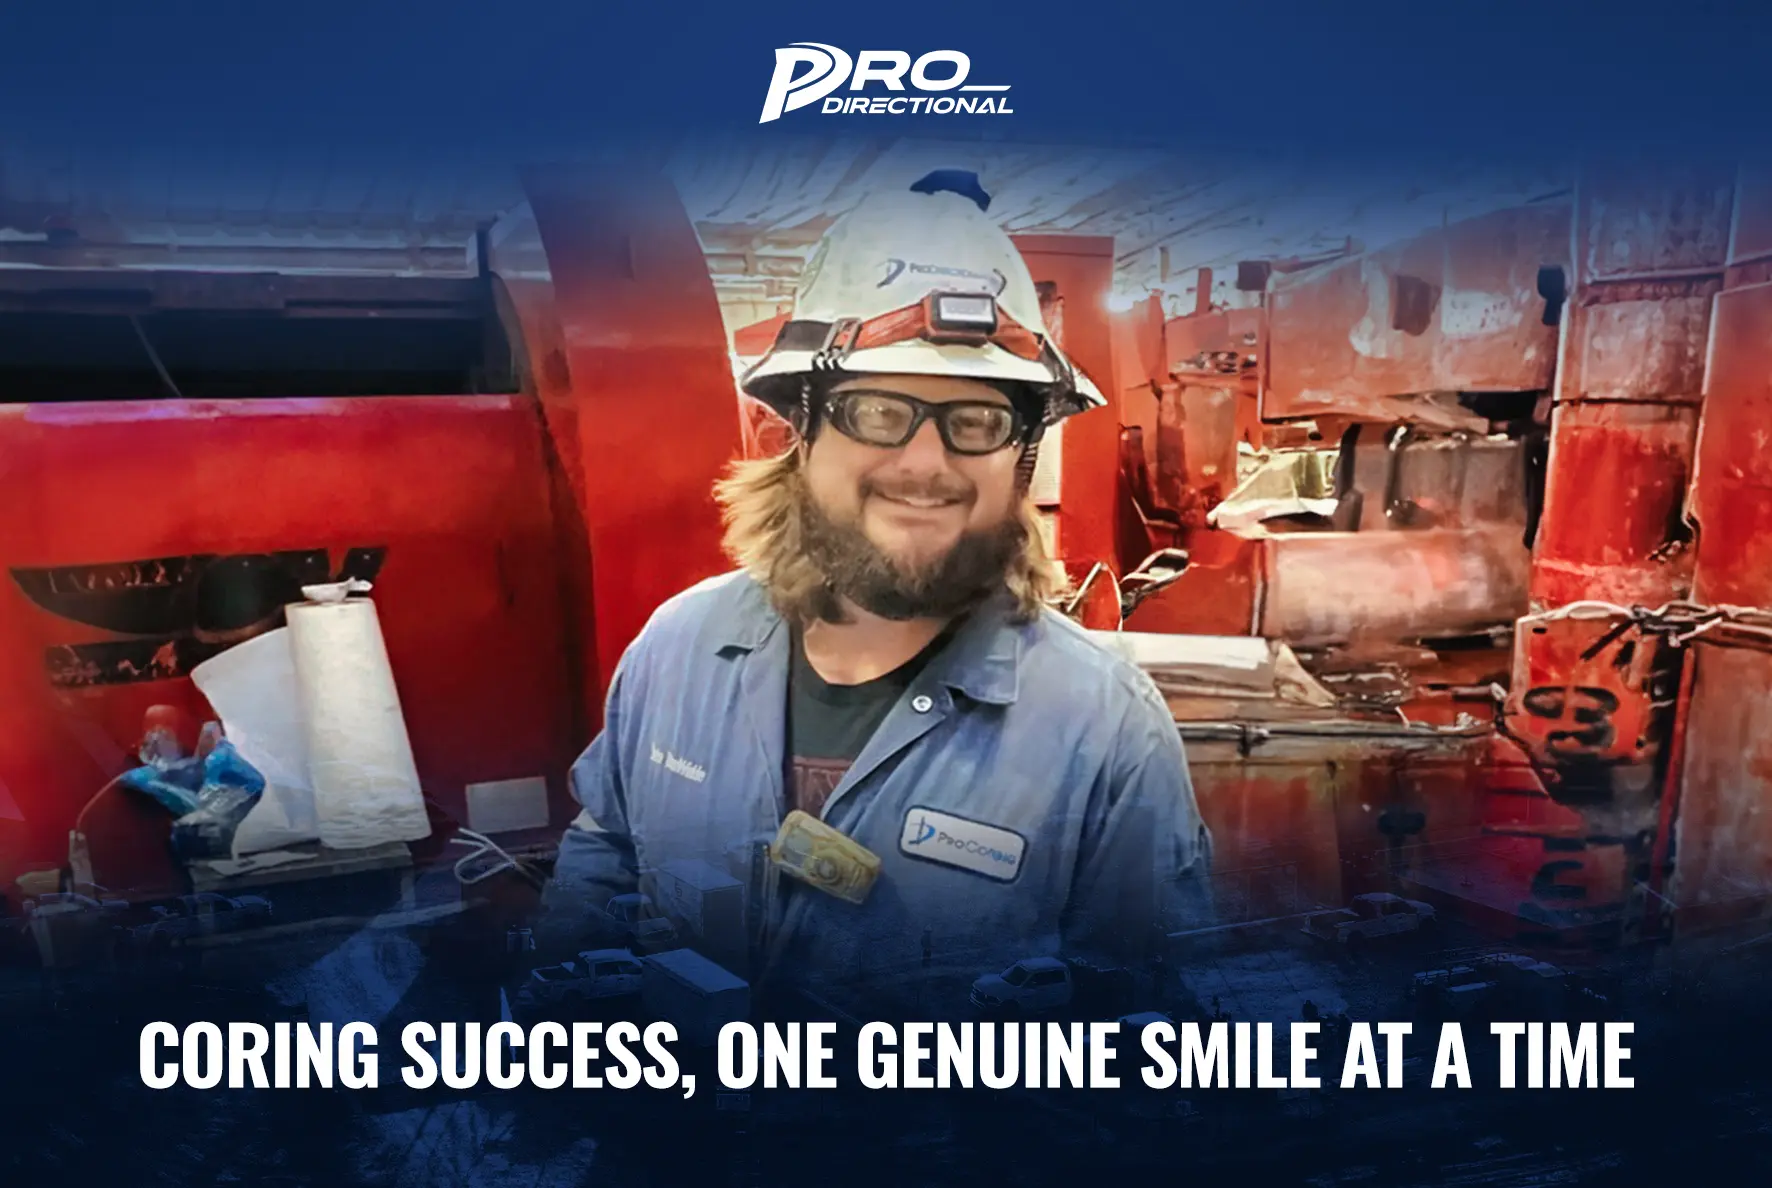 Featured Image for “Coring success, one genuine smile at a time”